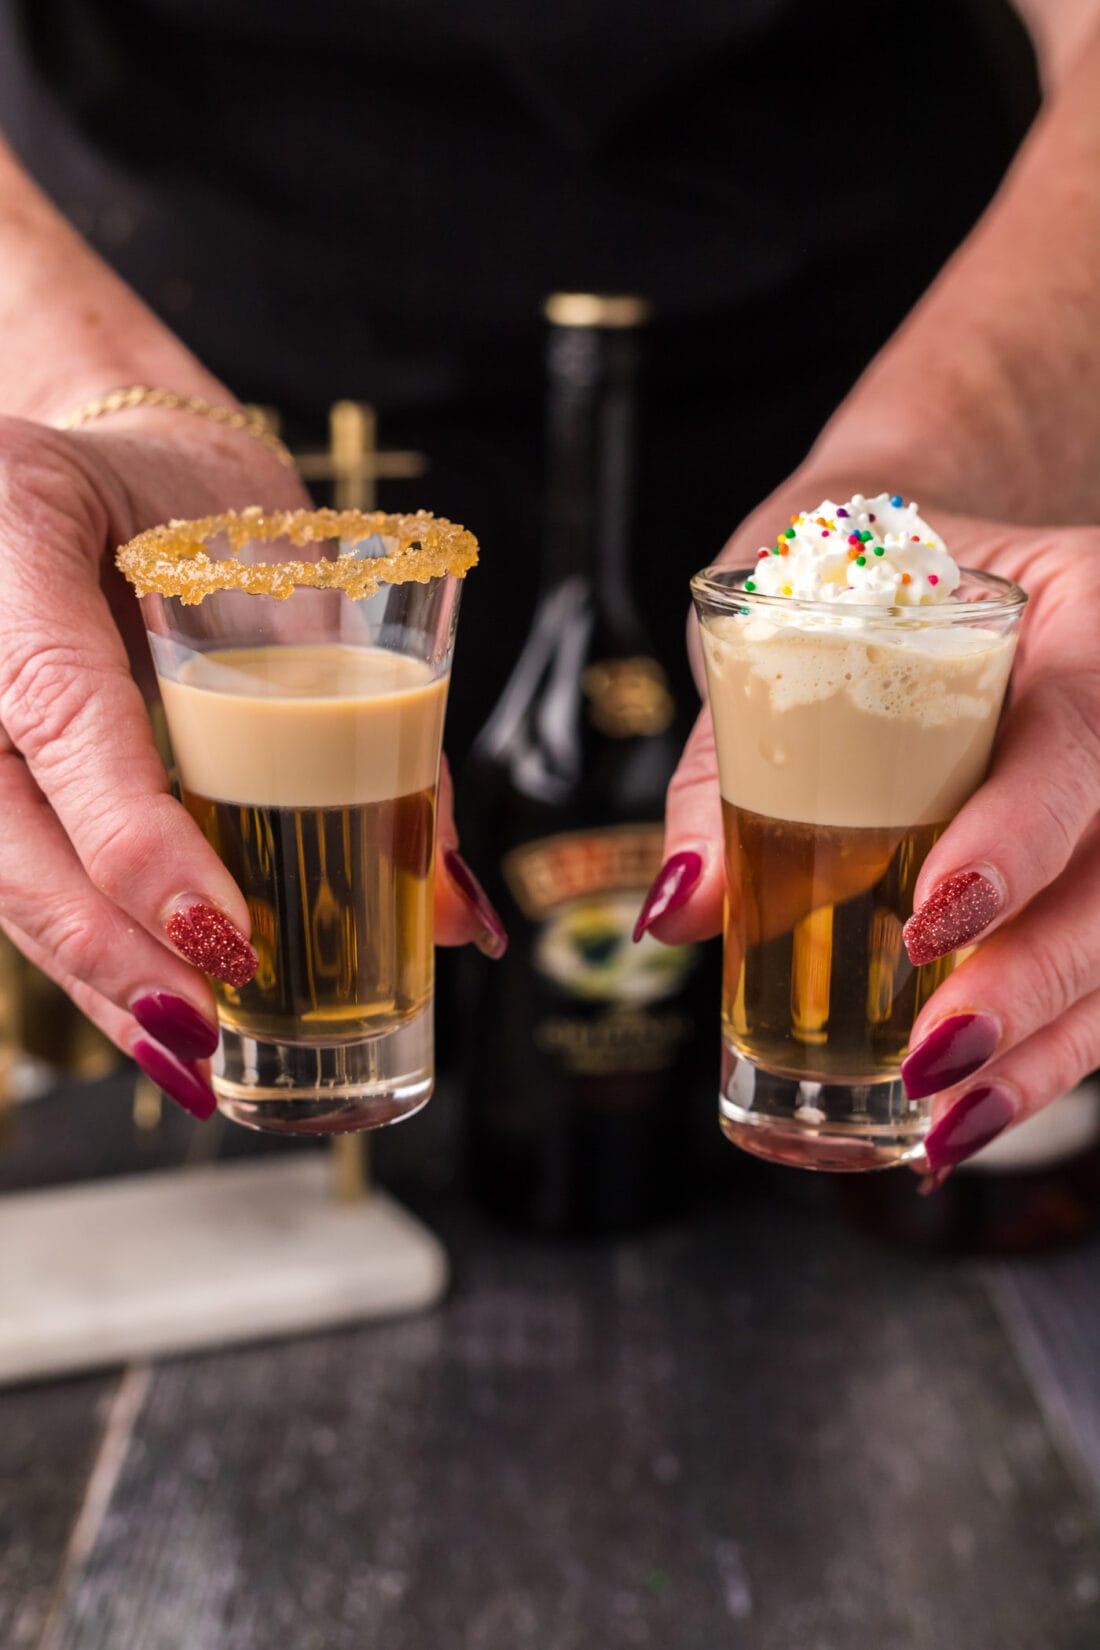 Two Buttery Nipple Shots being held up in the air